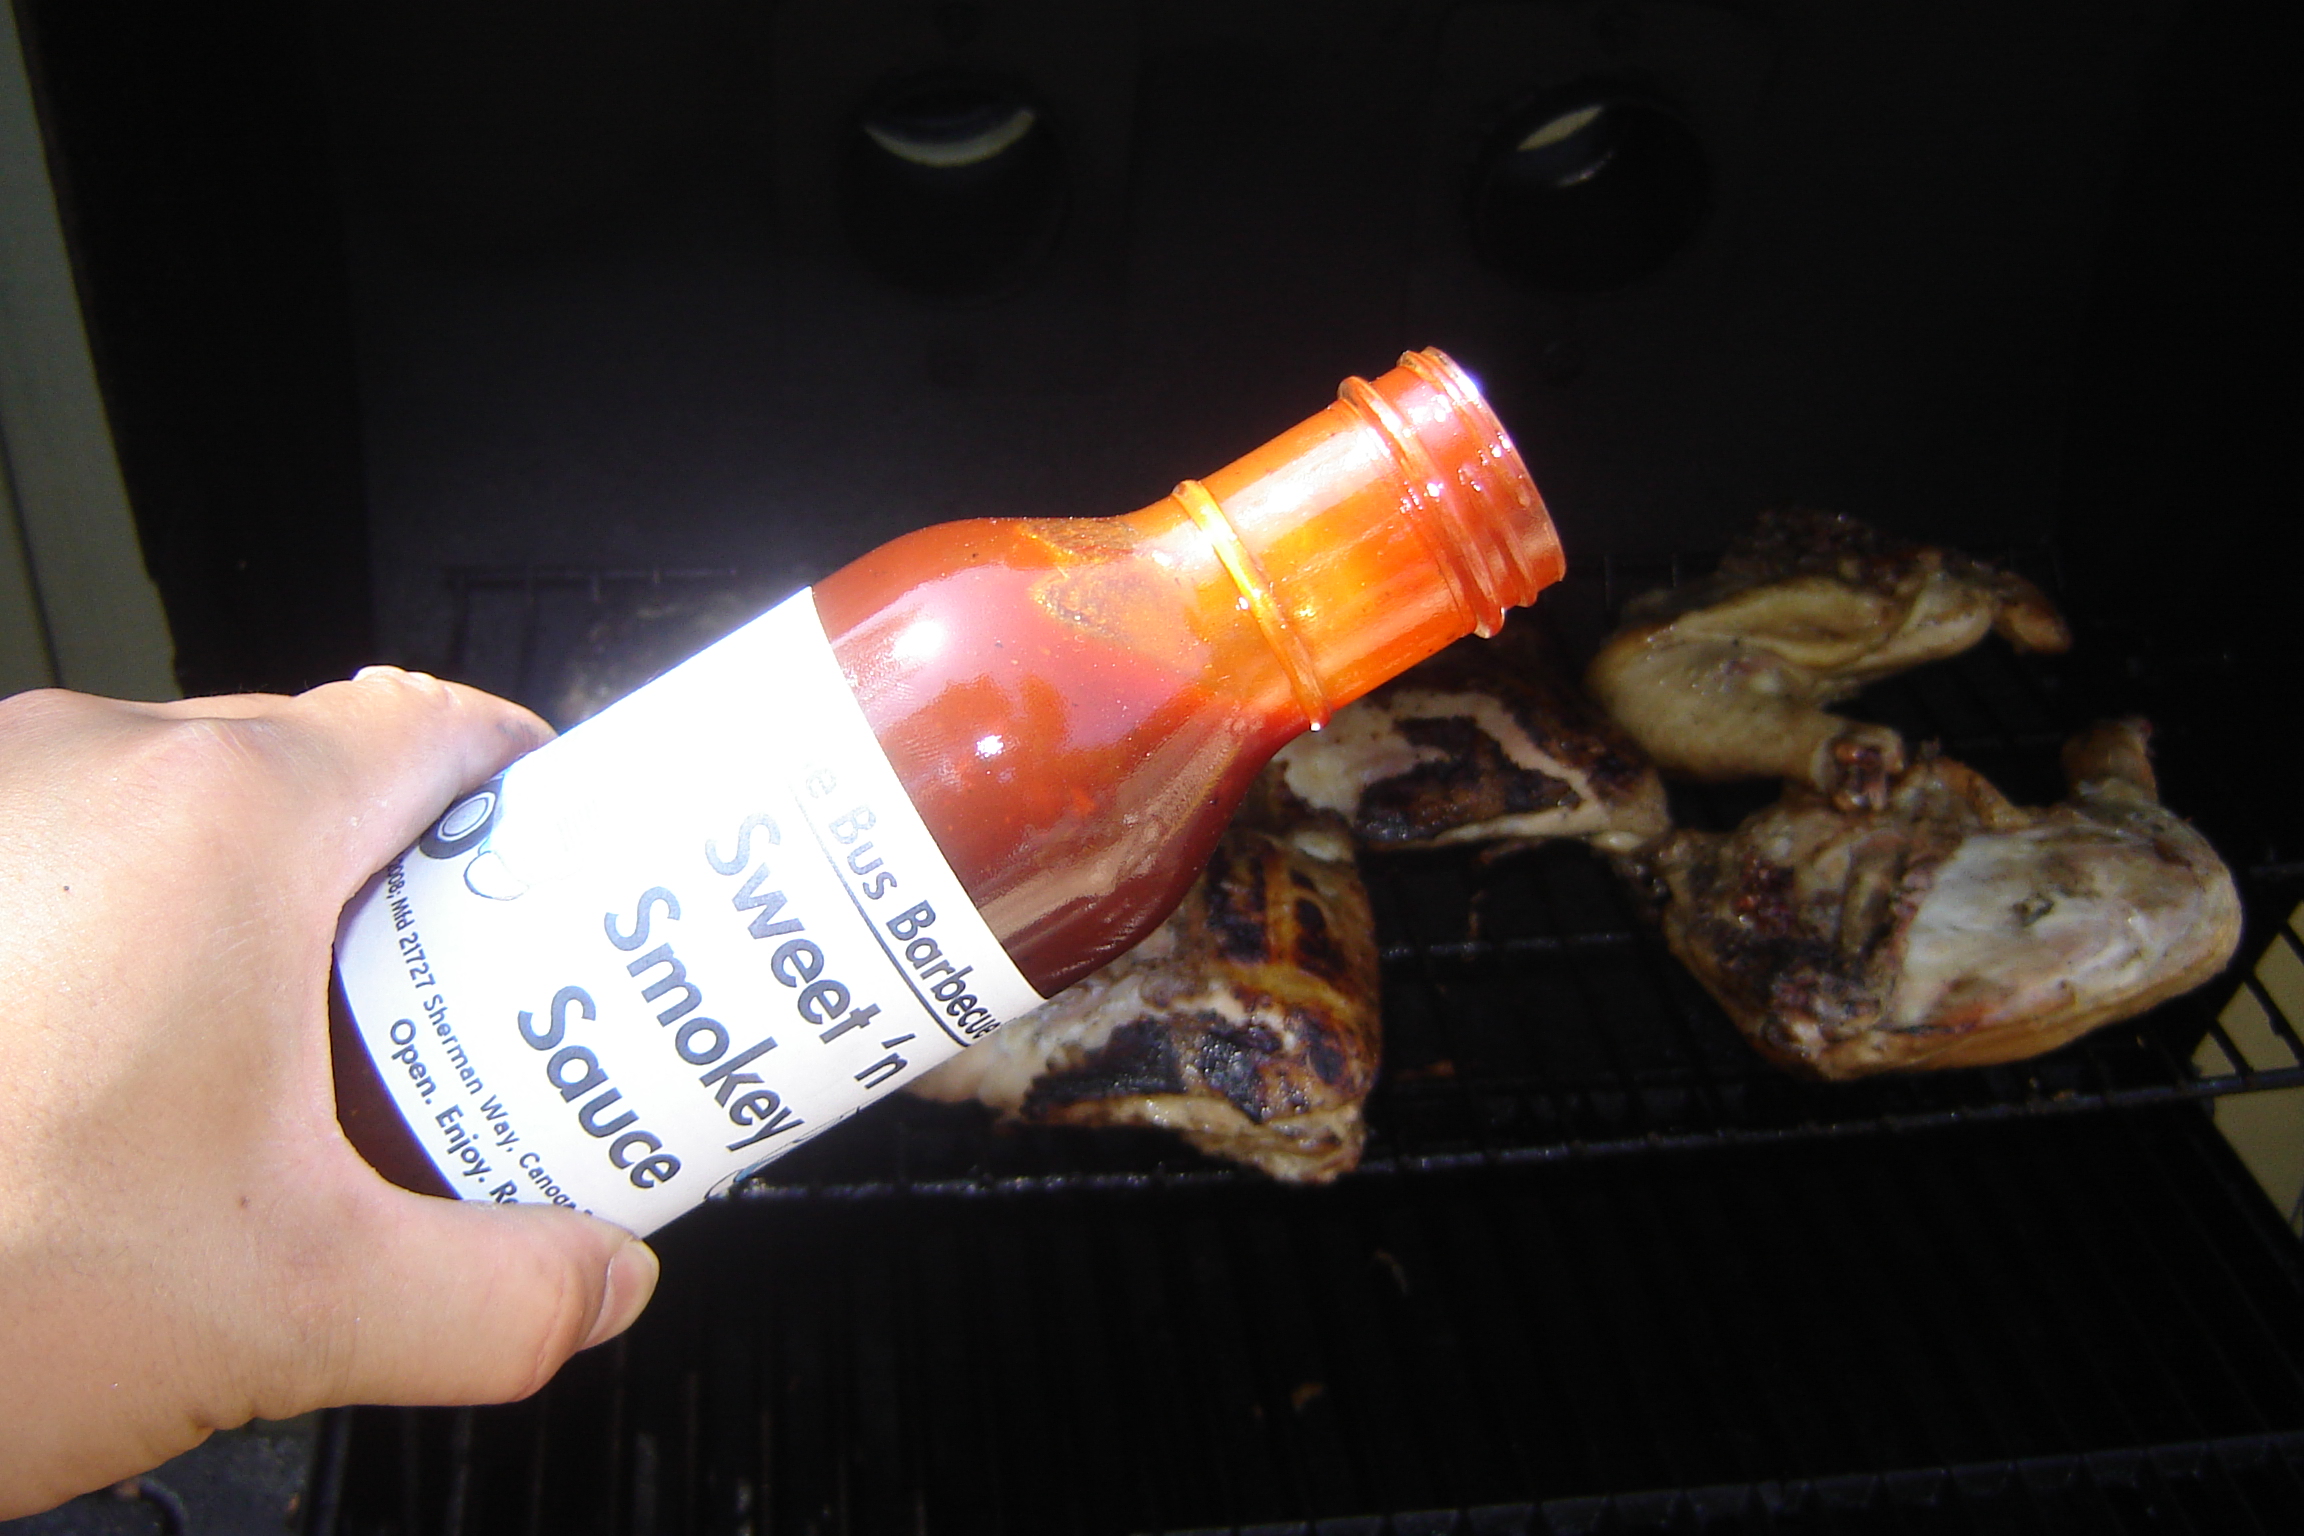 Our new hobby is reviewing BBQ sauce.  The kickoff was great.  